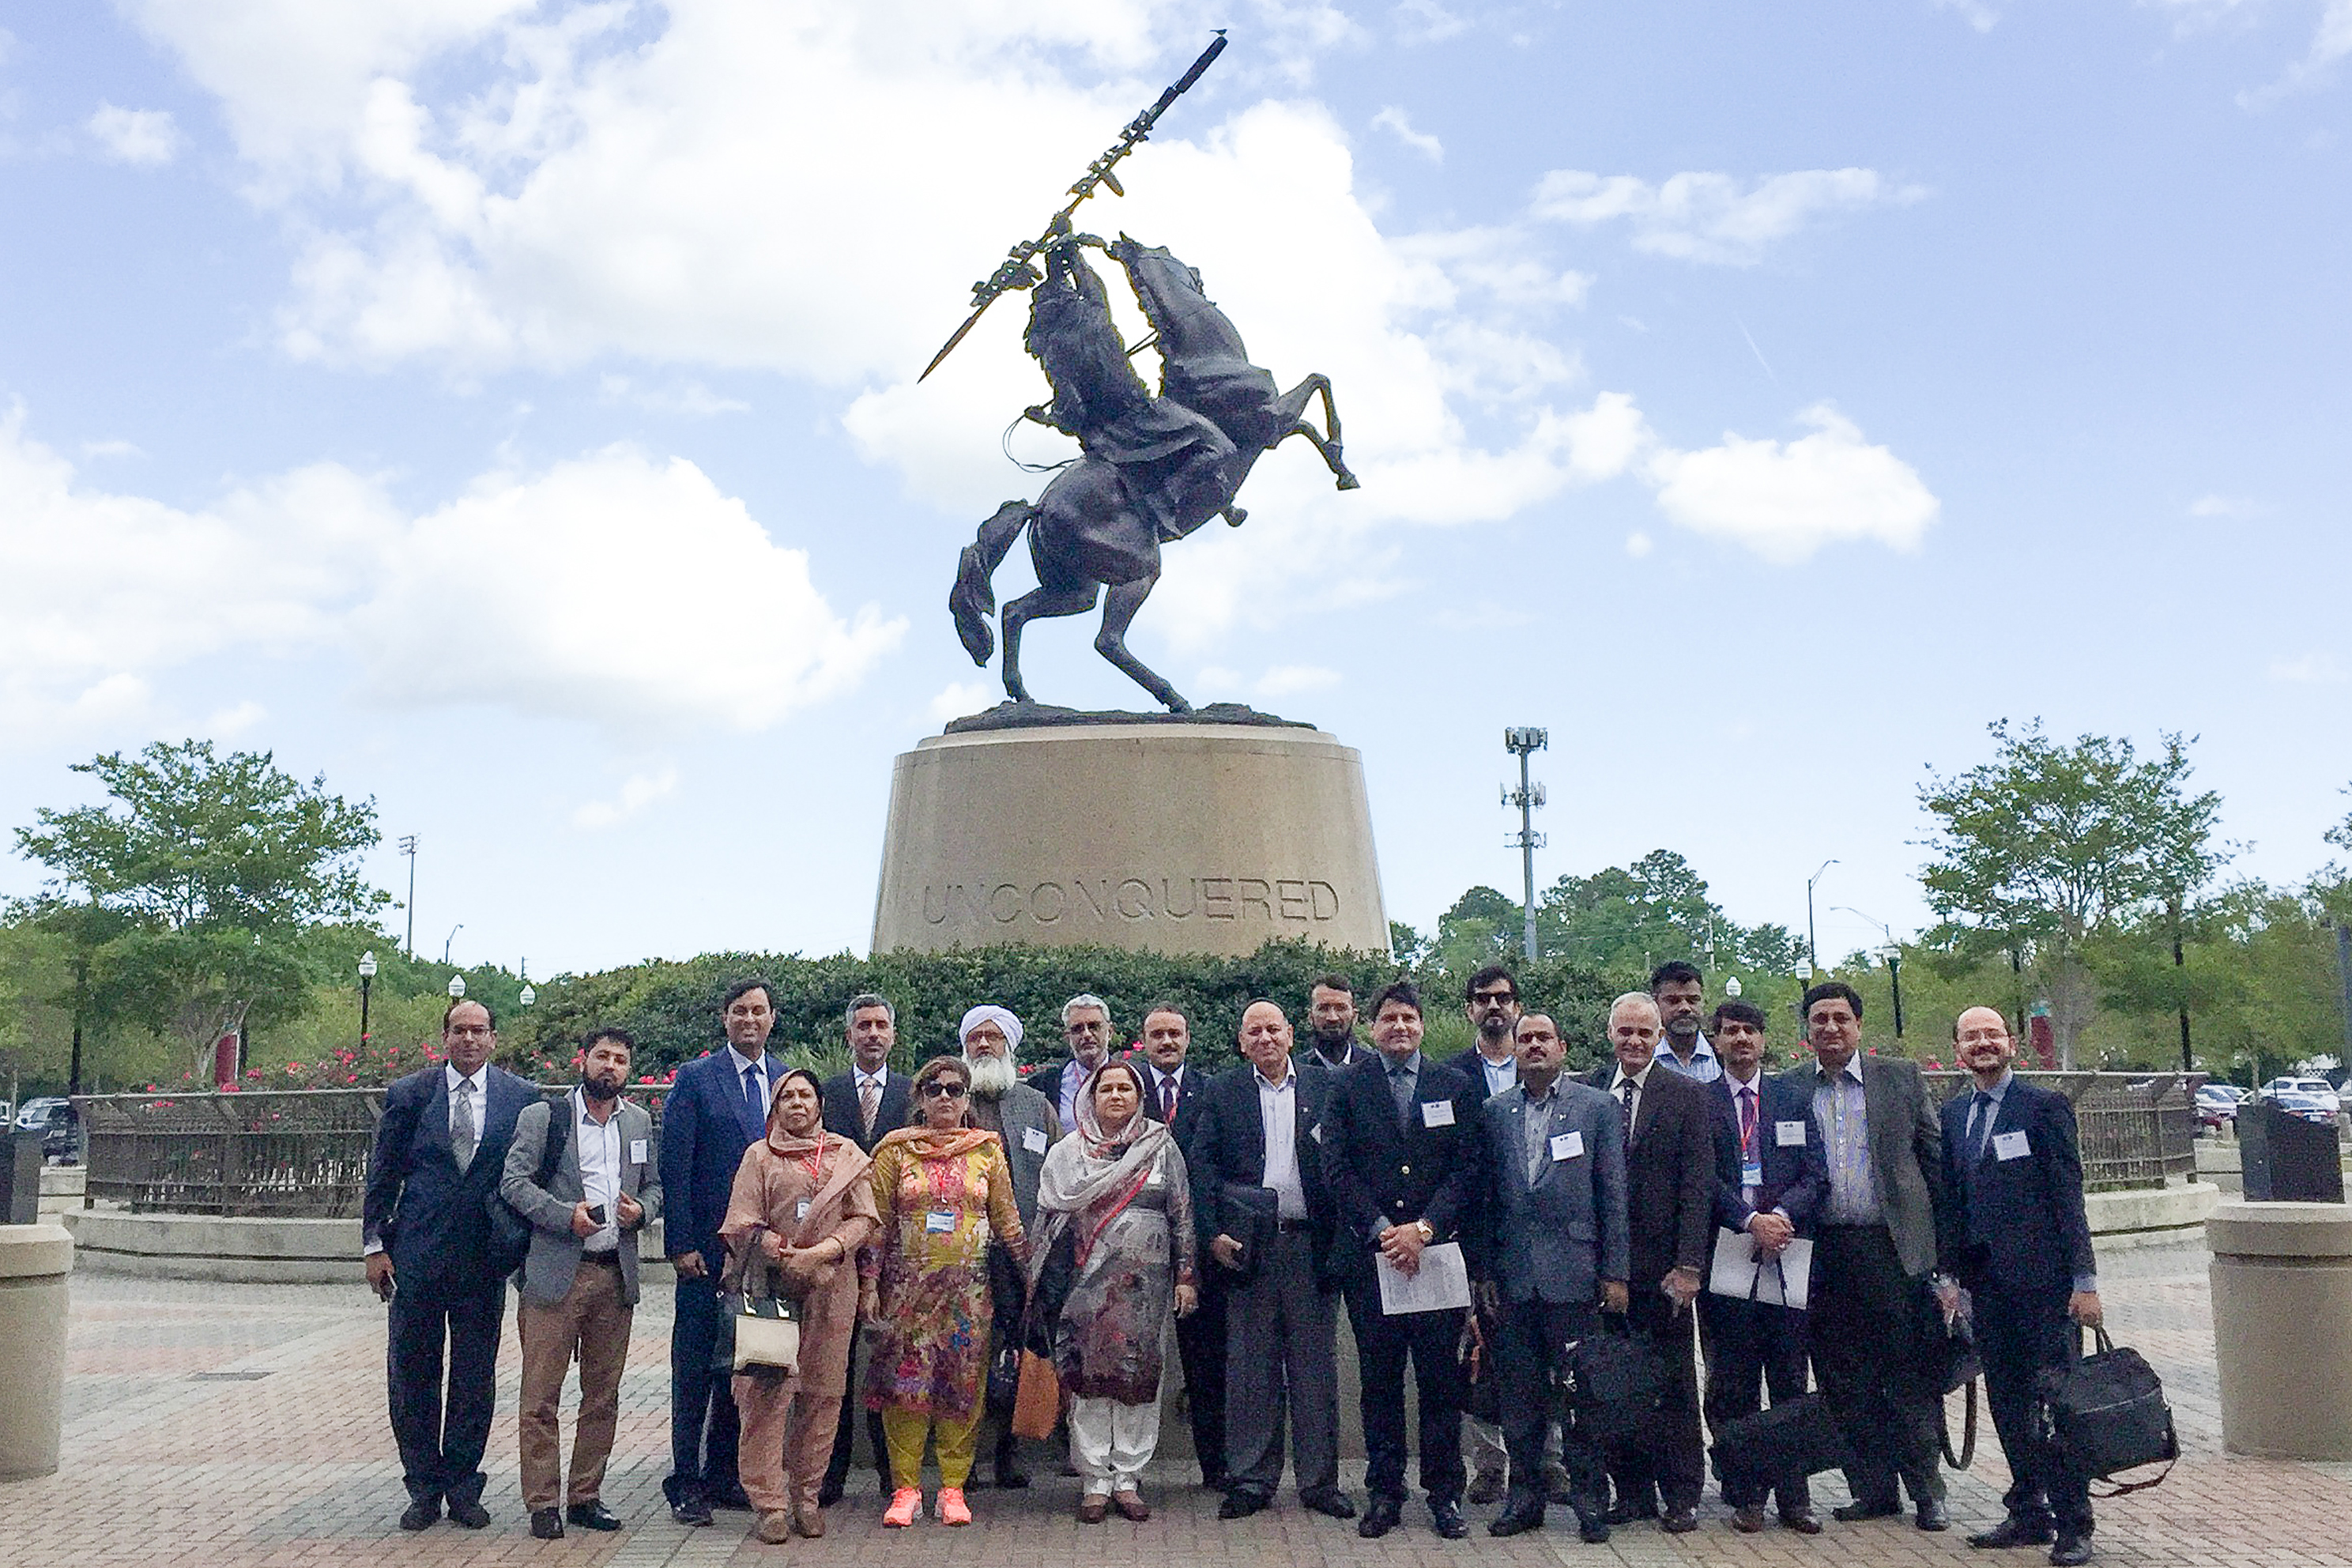 "CCAP Pakistan group posing in front of the Unconquered Statue at FSU"